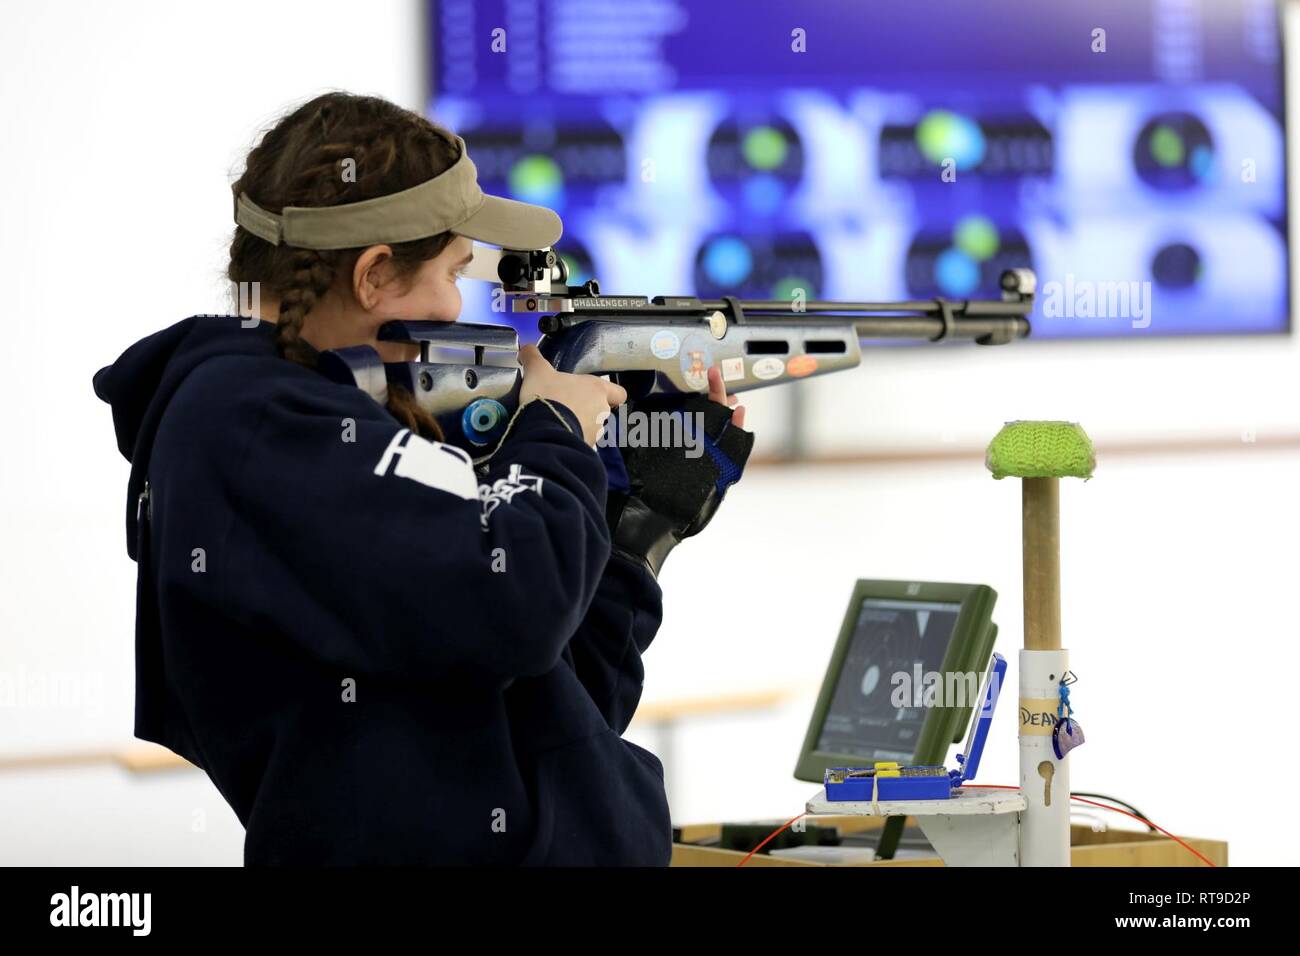 Jaden-Ann Fraser from Church Hill, Tennessee, fires her rifle at the Day 2 Sporter Finals during the U.S. Army Junior Rifle National Championships at Fort Benning, Georgia January 25, 2019. The three-day, invitation-only event had the youth athletes compete side by side for top individual and team honors in three-position smallbore, sporter rifle and precision rifle. At the end of the competition, Fraser placed second in the overall individual Sporter Class with a score of 1121 and 35X. Stock Photo